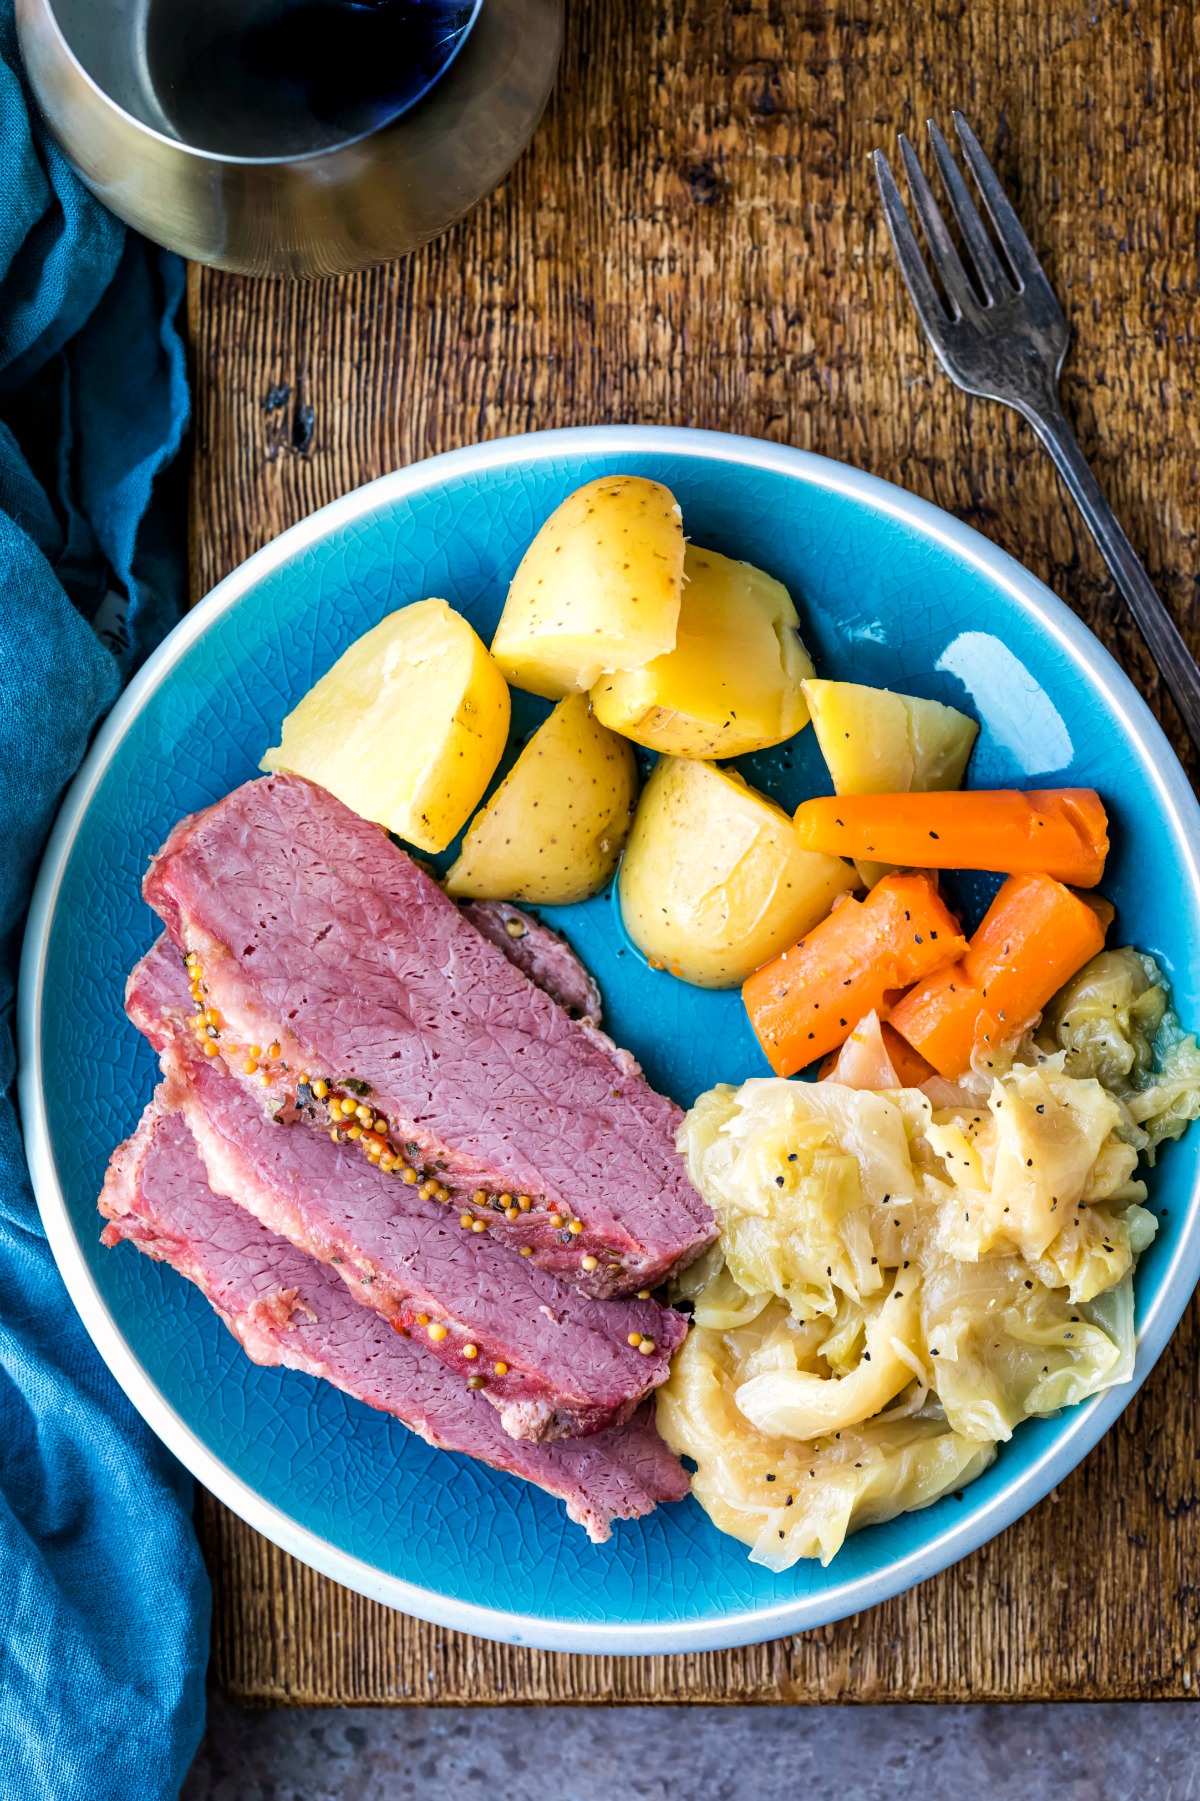 Three slices of corned beef on a plate next to potatoes and cabbage.